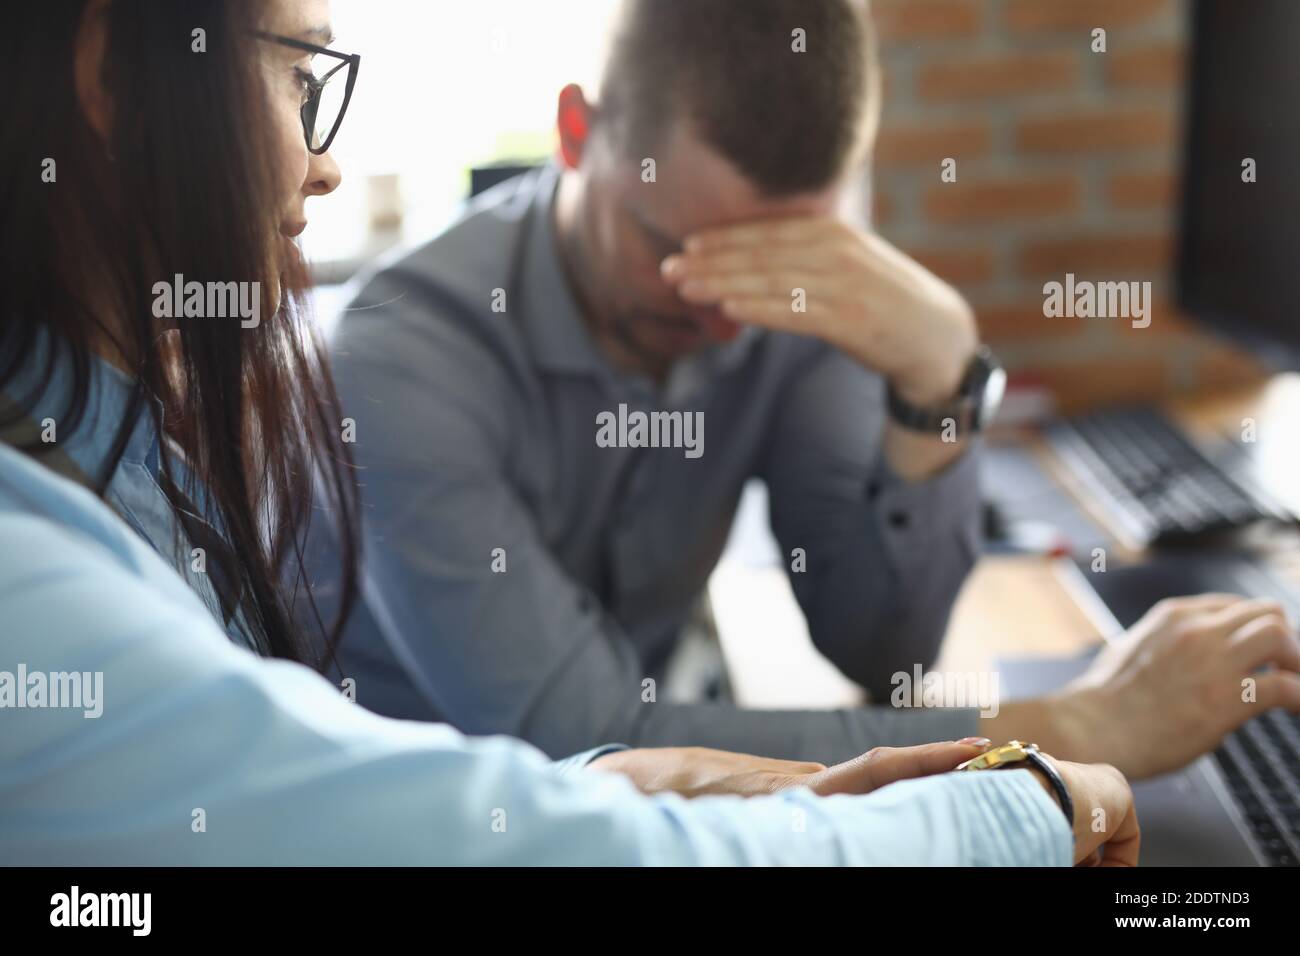 Man regret that he make mistake and sit sad with his head down. Stock Photo